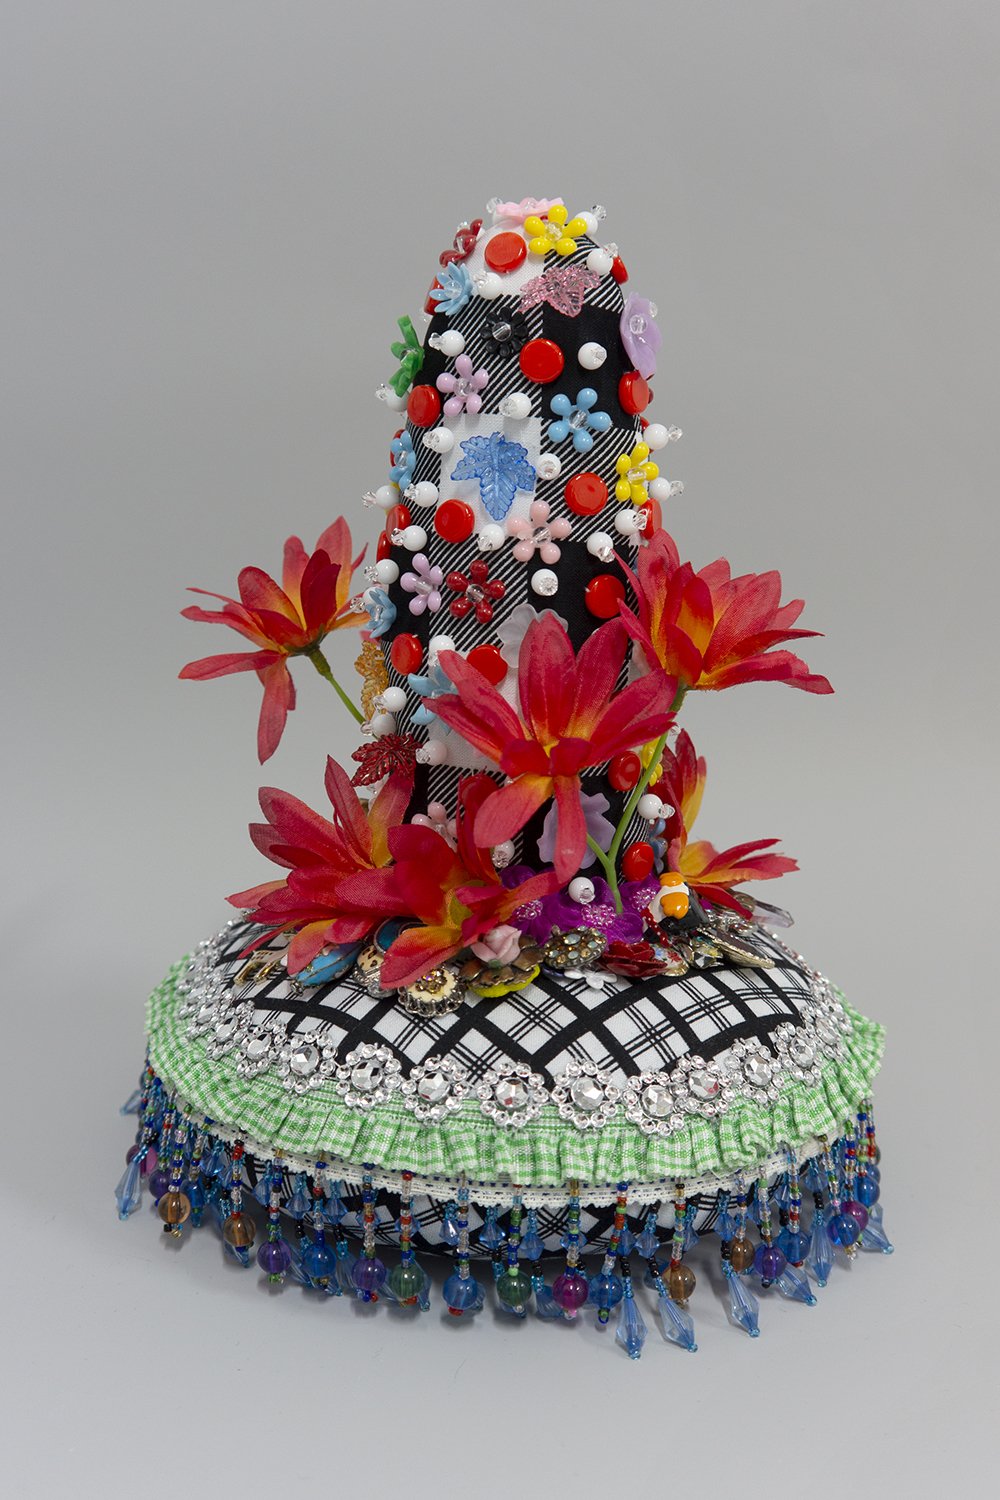   Untitled,  2022, Crystal and plastic beads and sequins, found fabric, trim, fabric flowers, costume jewelry, polyester batting, thread, 10 x 8 x 8” 